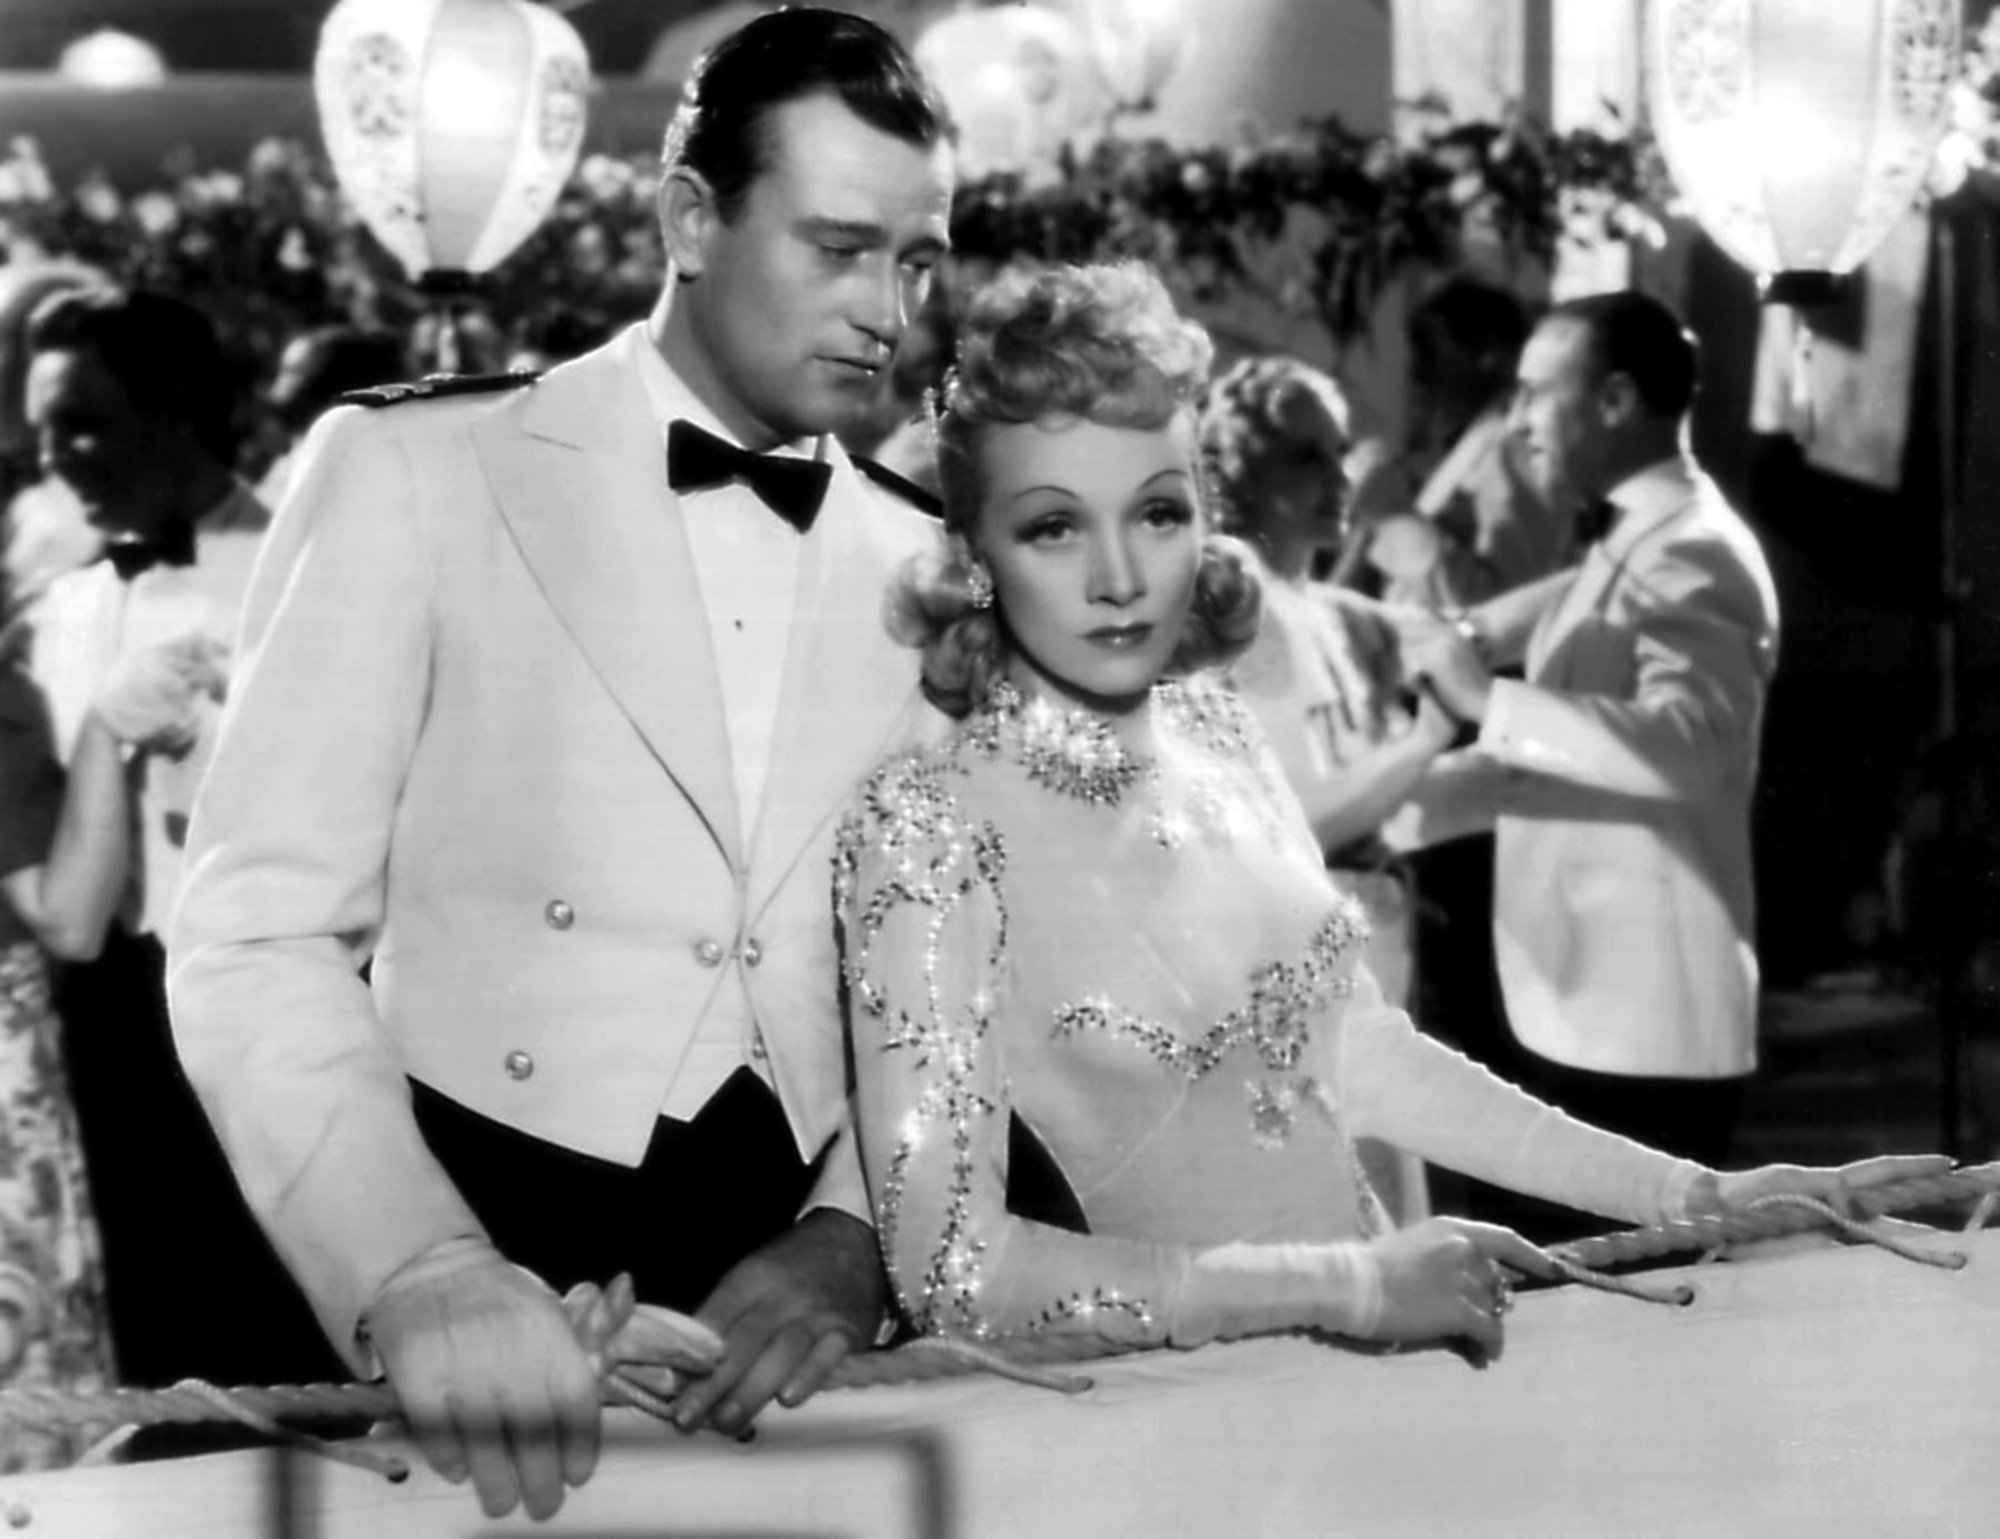 'The Seven Sinners' John Wayne as Dan and Marlene Dietrich as Bijou, who allegedly made him say the Pledge of Allegiance in between her thighs. They are holding onto a rope bannister, dressed in a tux and dress.